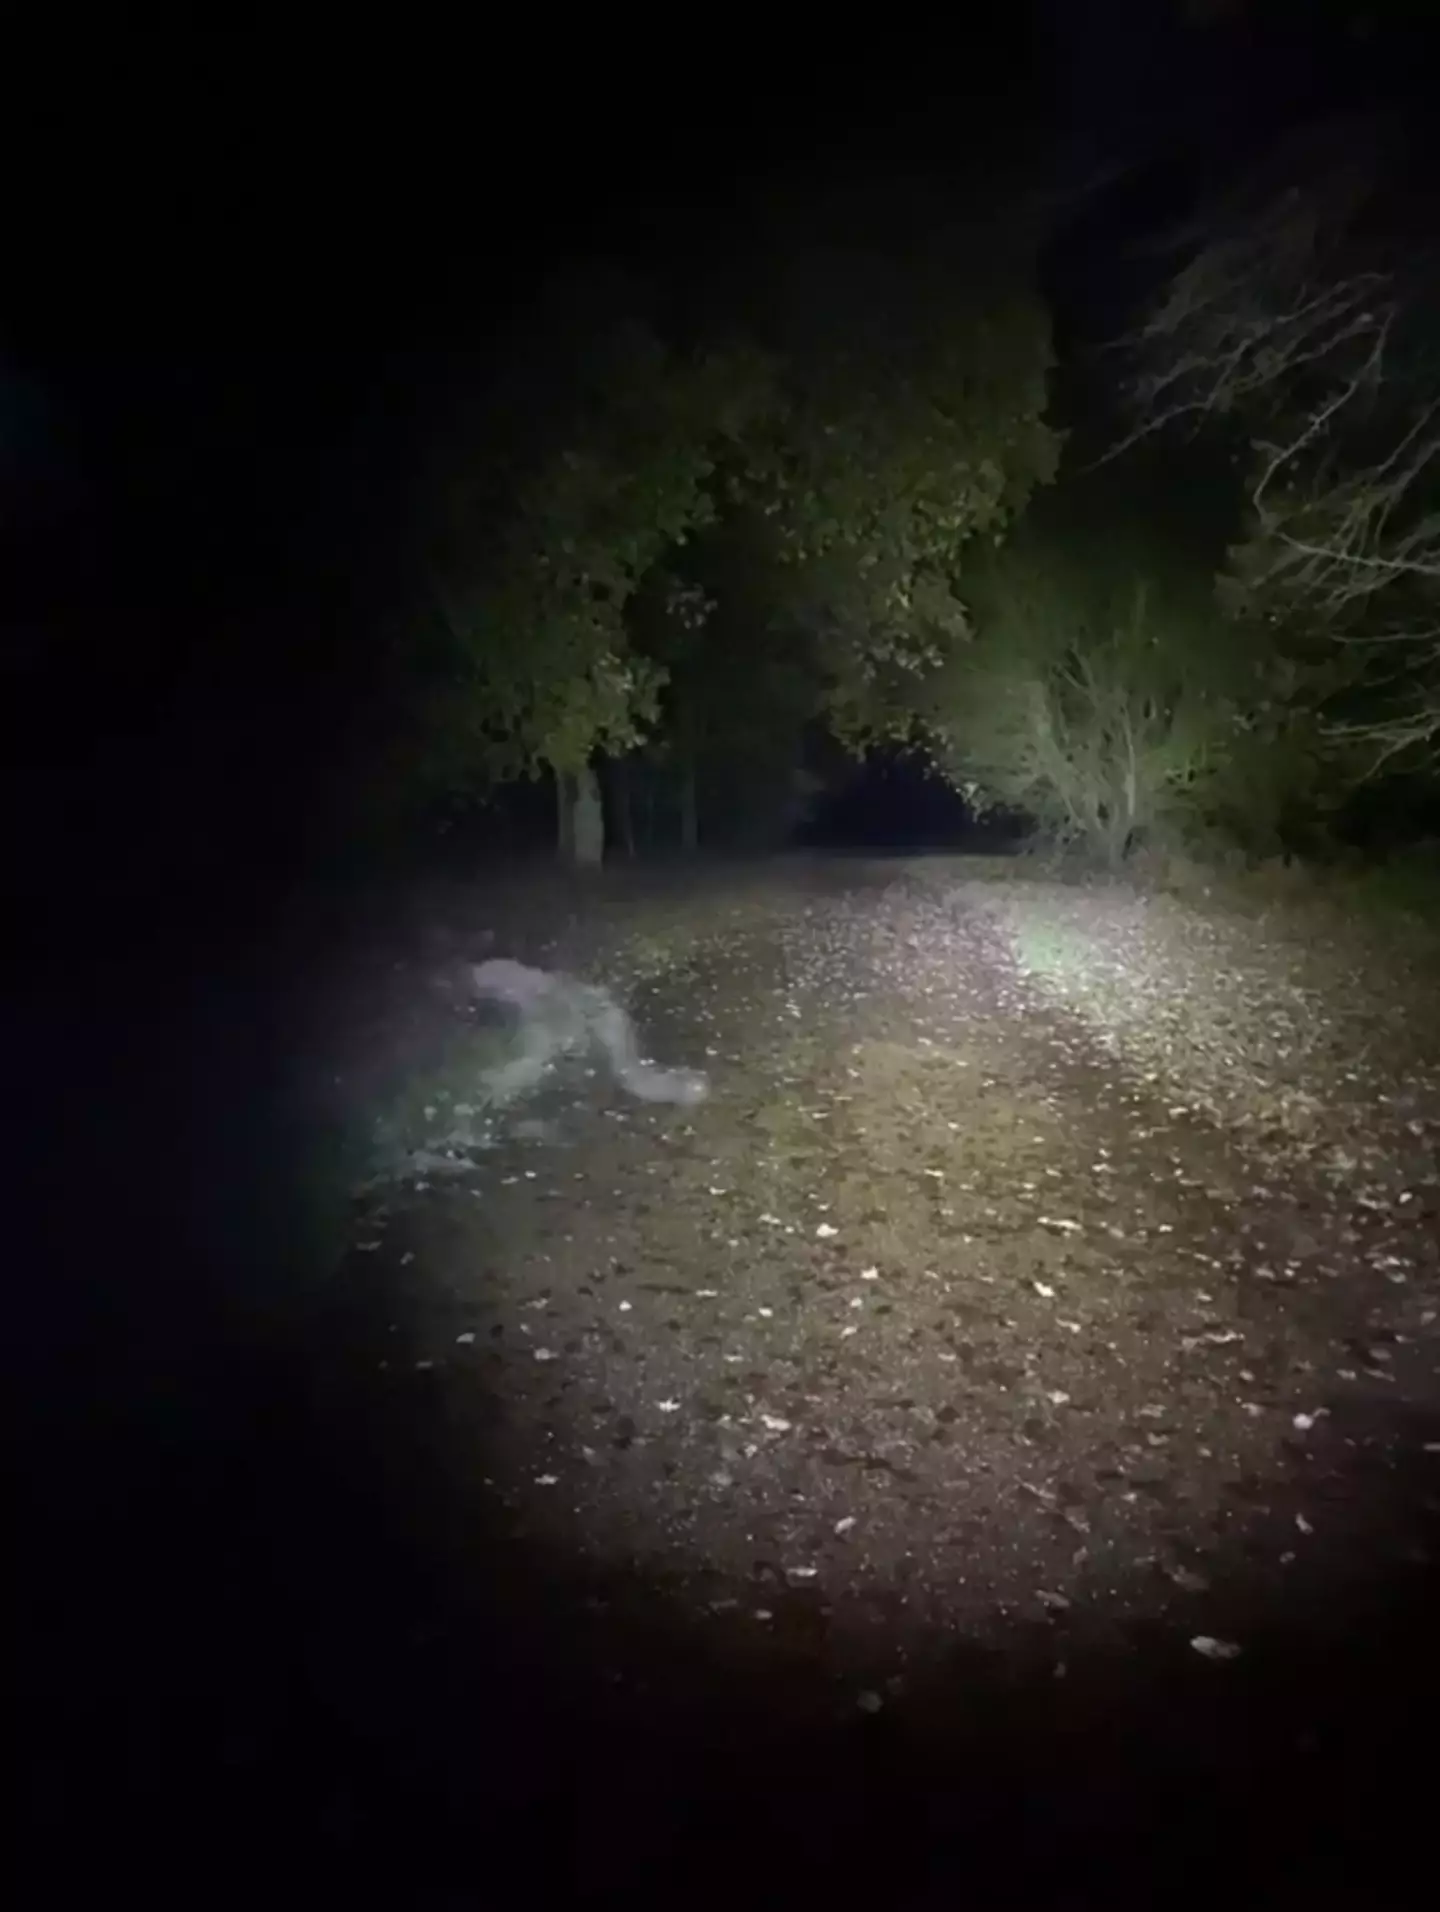 The ghostly figure was caught on video.